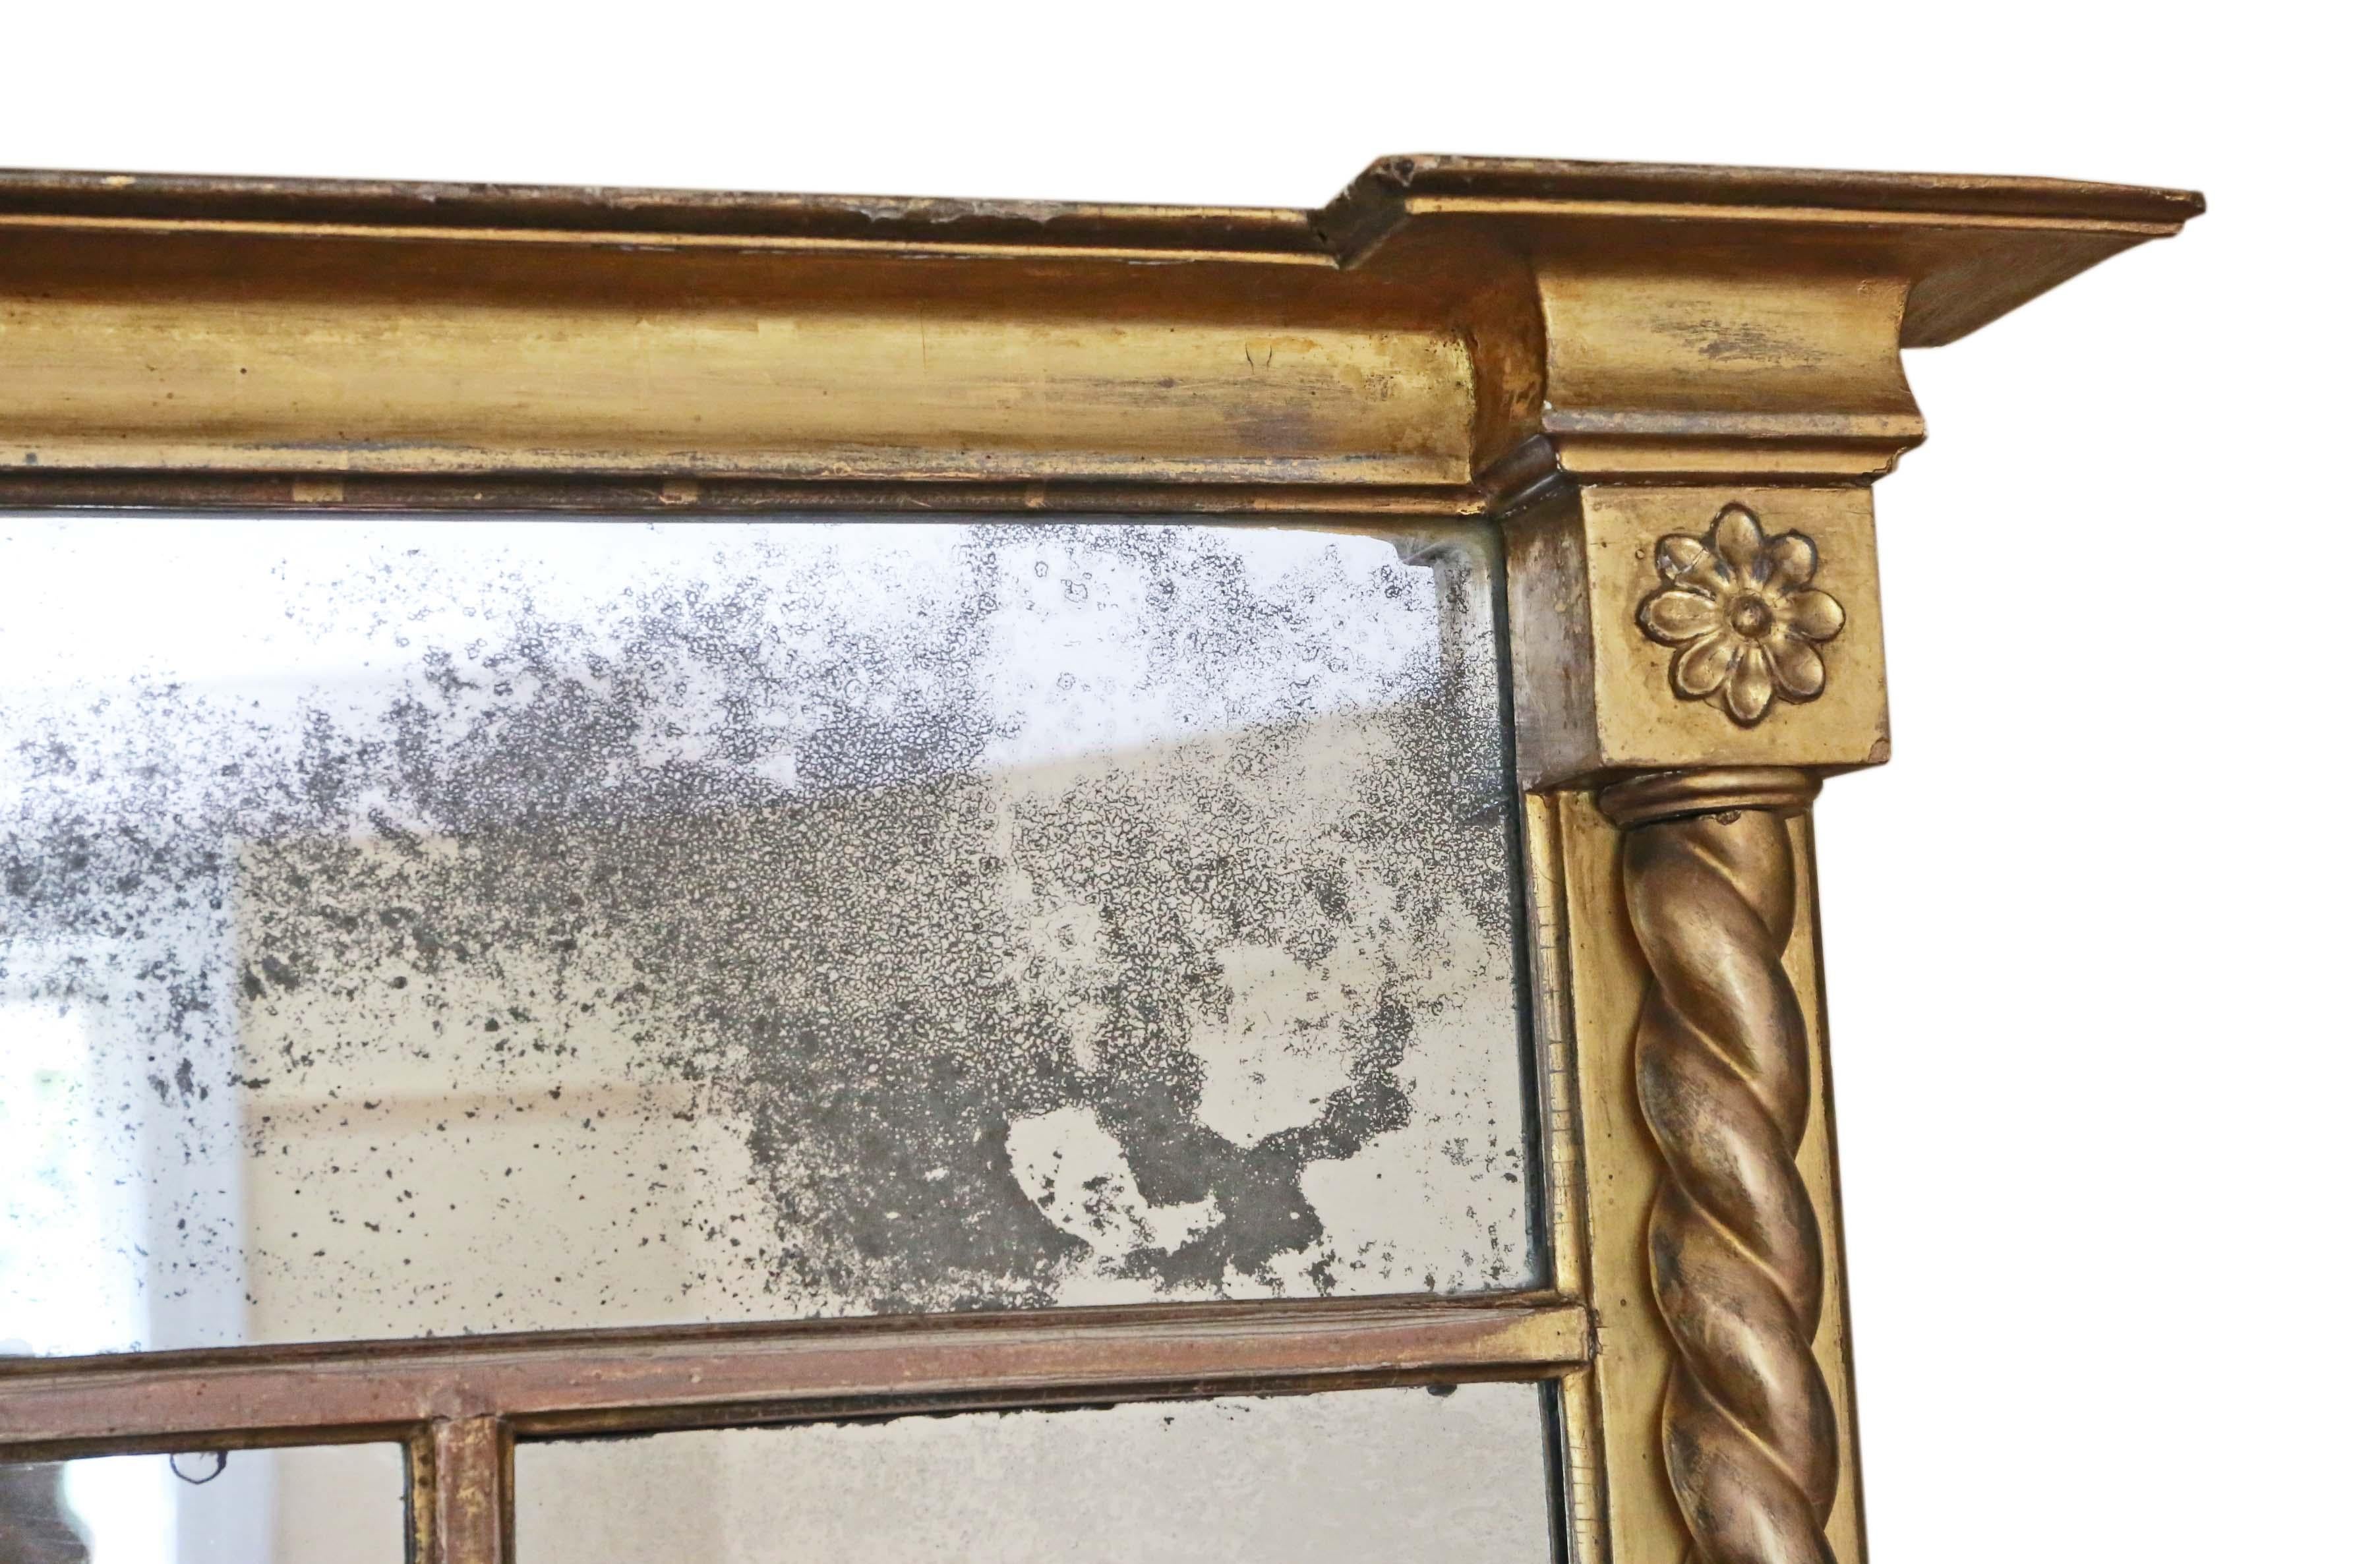 Regency overmantle or wall mirror, circa 1825.
This is a lovely mirror, that is full of age, charm and character. Great patinated frame which has had minor losses, minor repairs and minor touching up/refinishing over the years (some charming aging,